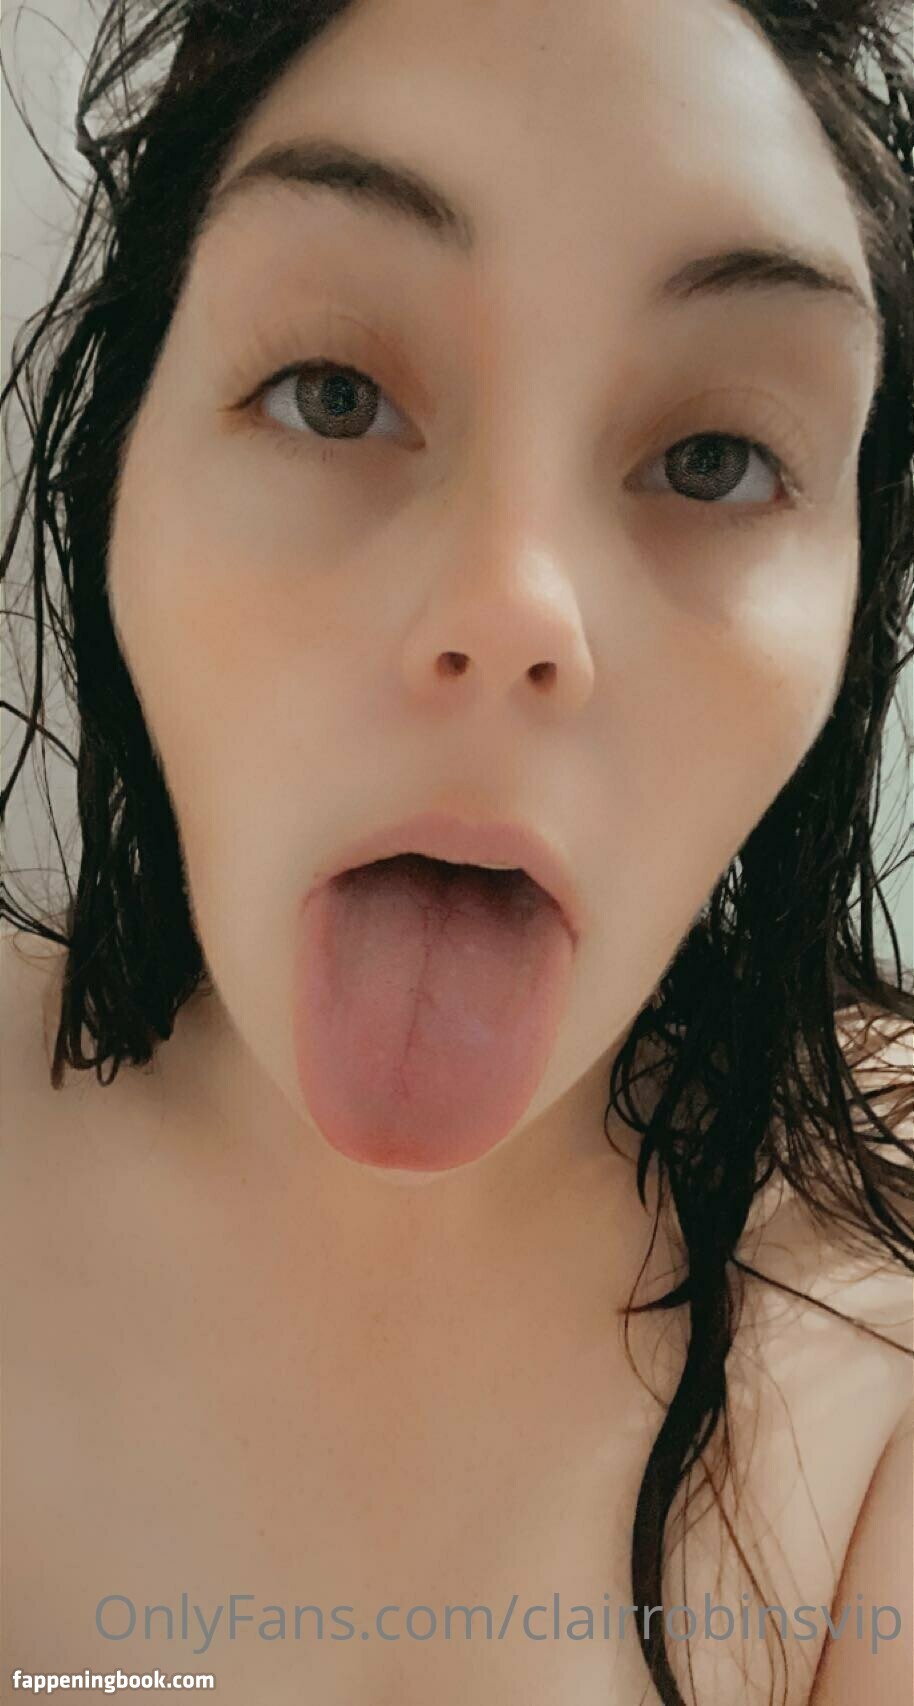 clairrobinsvip Nude OnlyFans Leaks